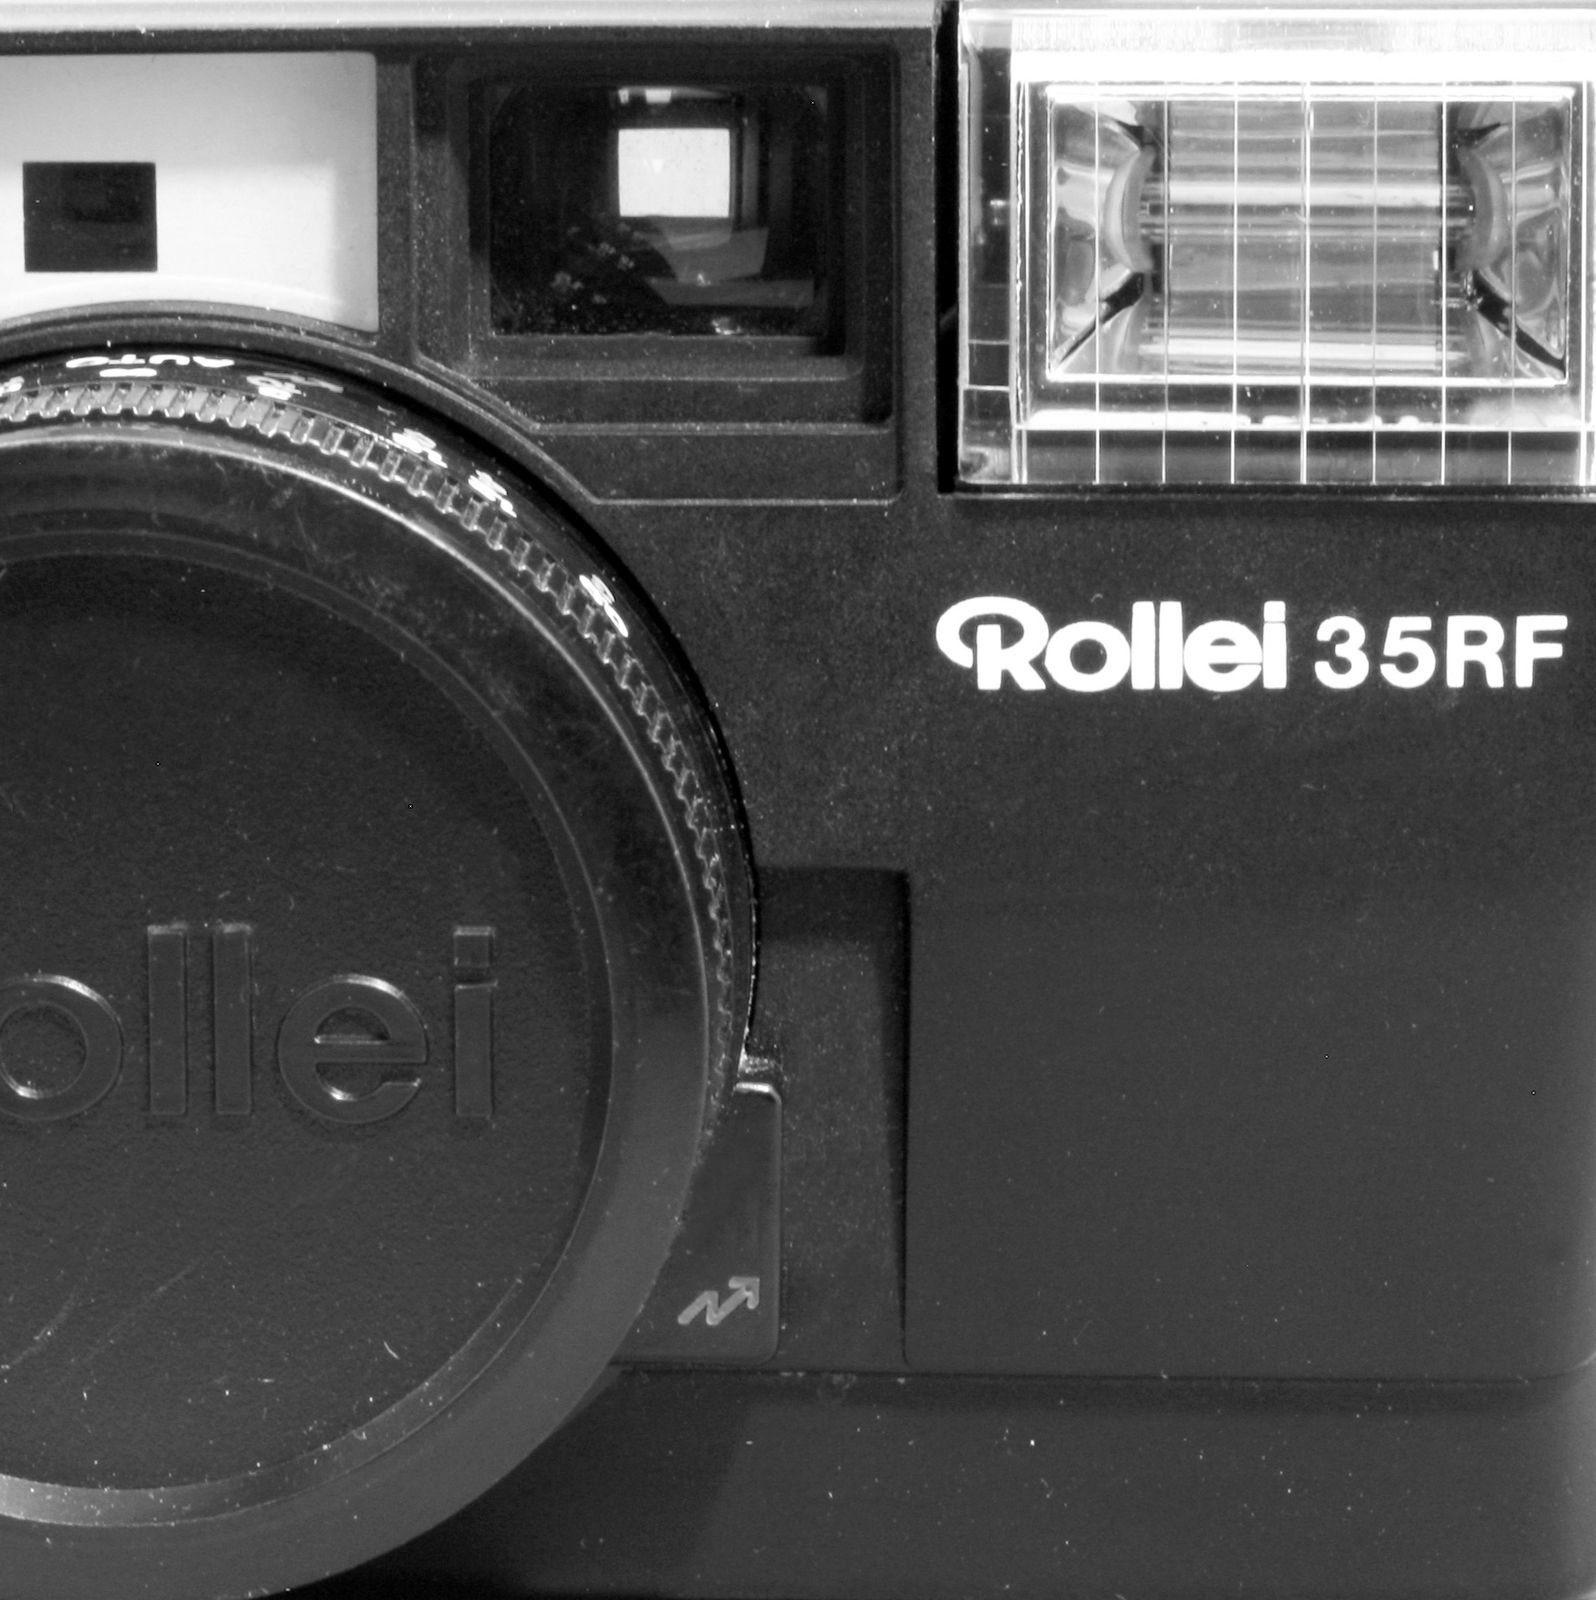 Rollei by Nitto.